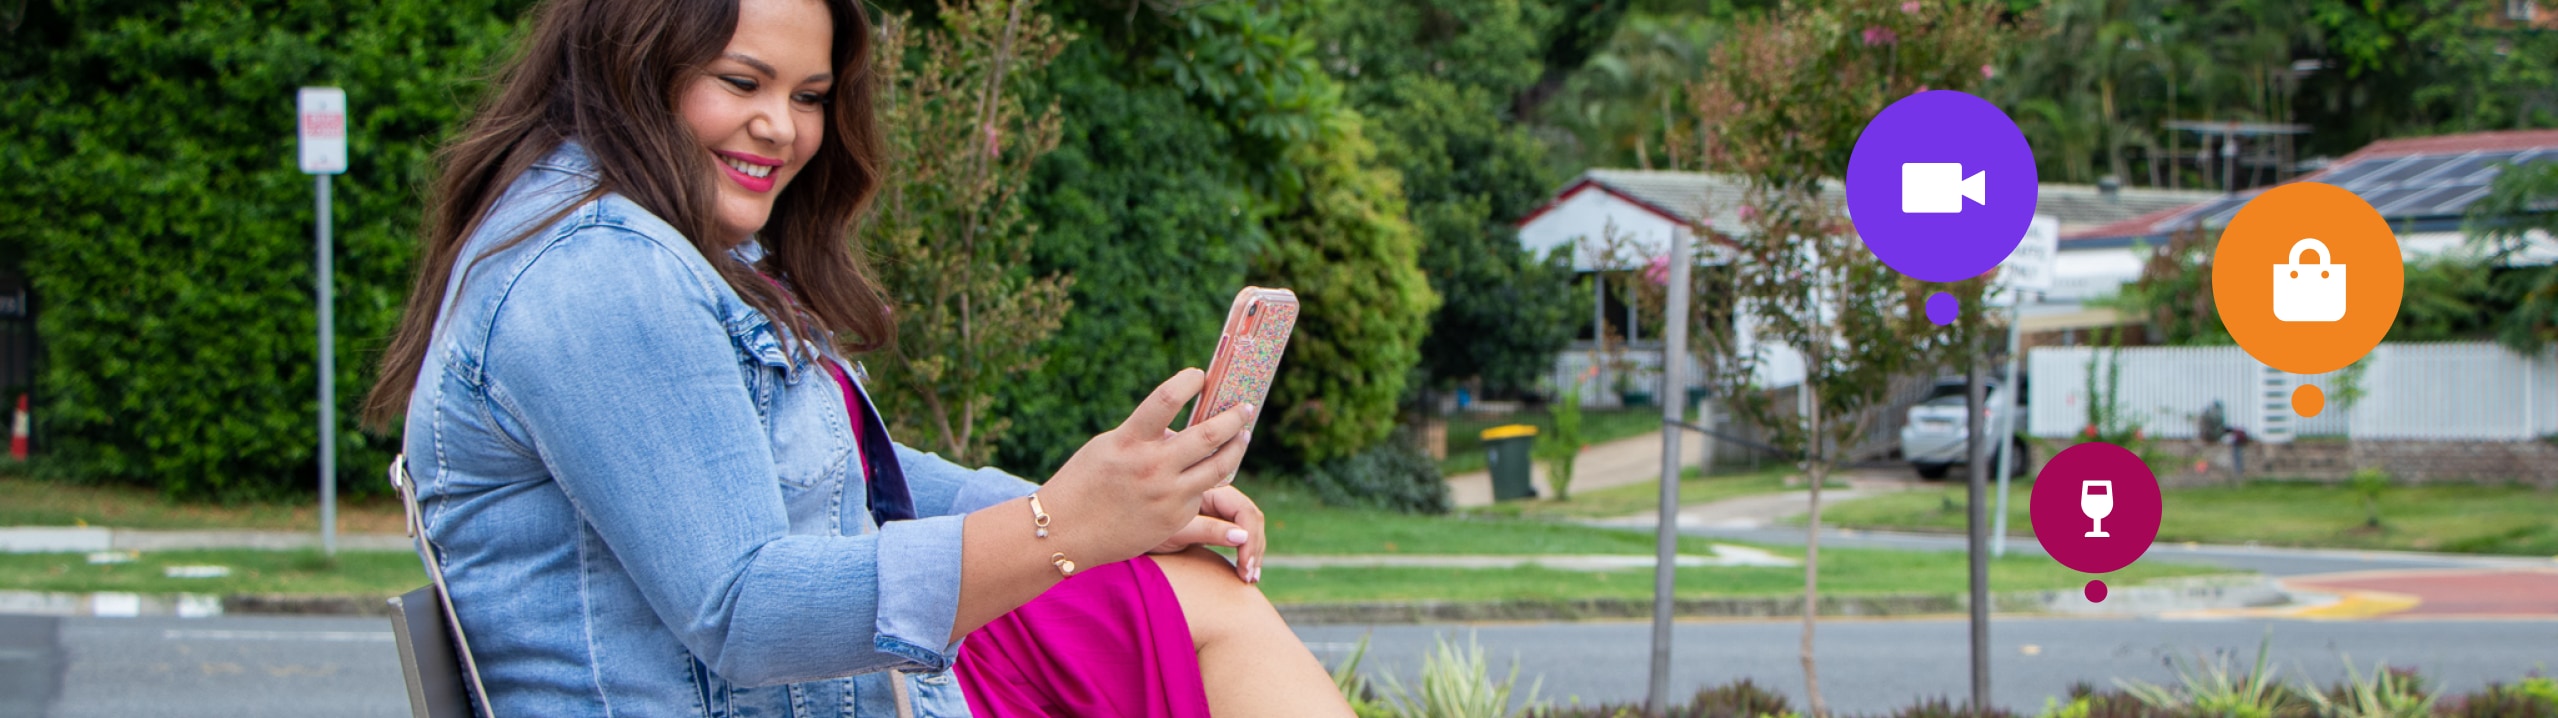 Banner image showing someone sitting on a park bench using the Brisbane app.